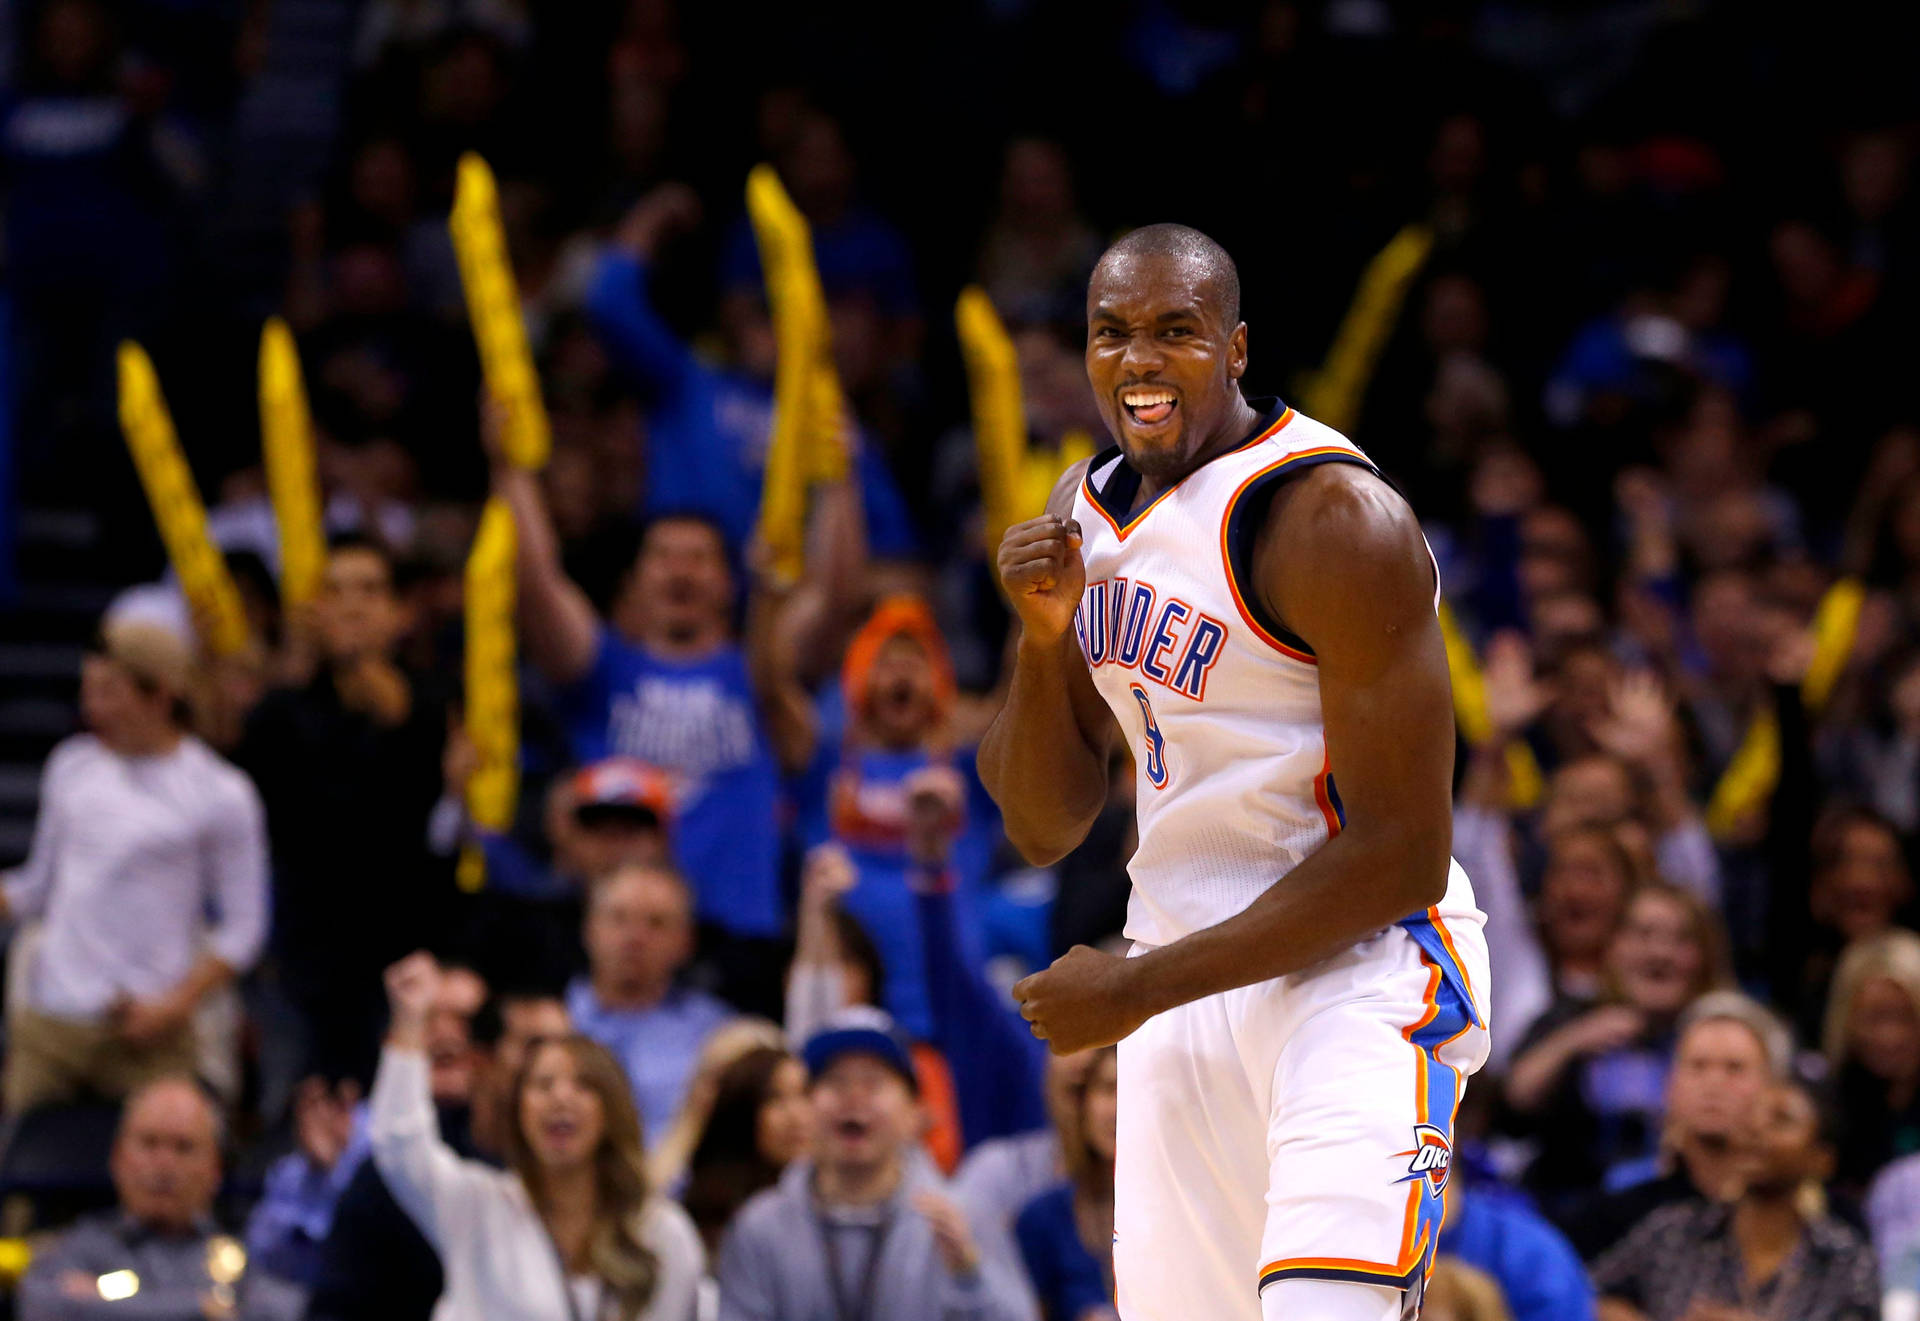 Serge Ibaka With Cheering Fans Background